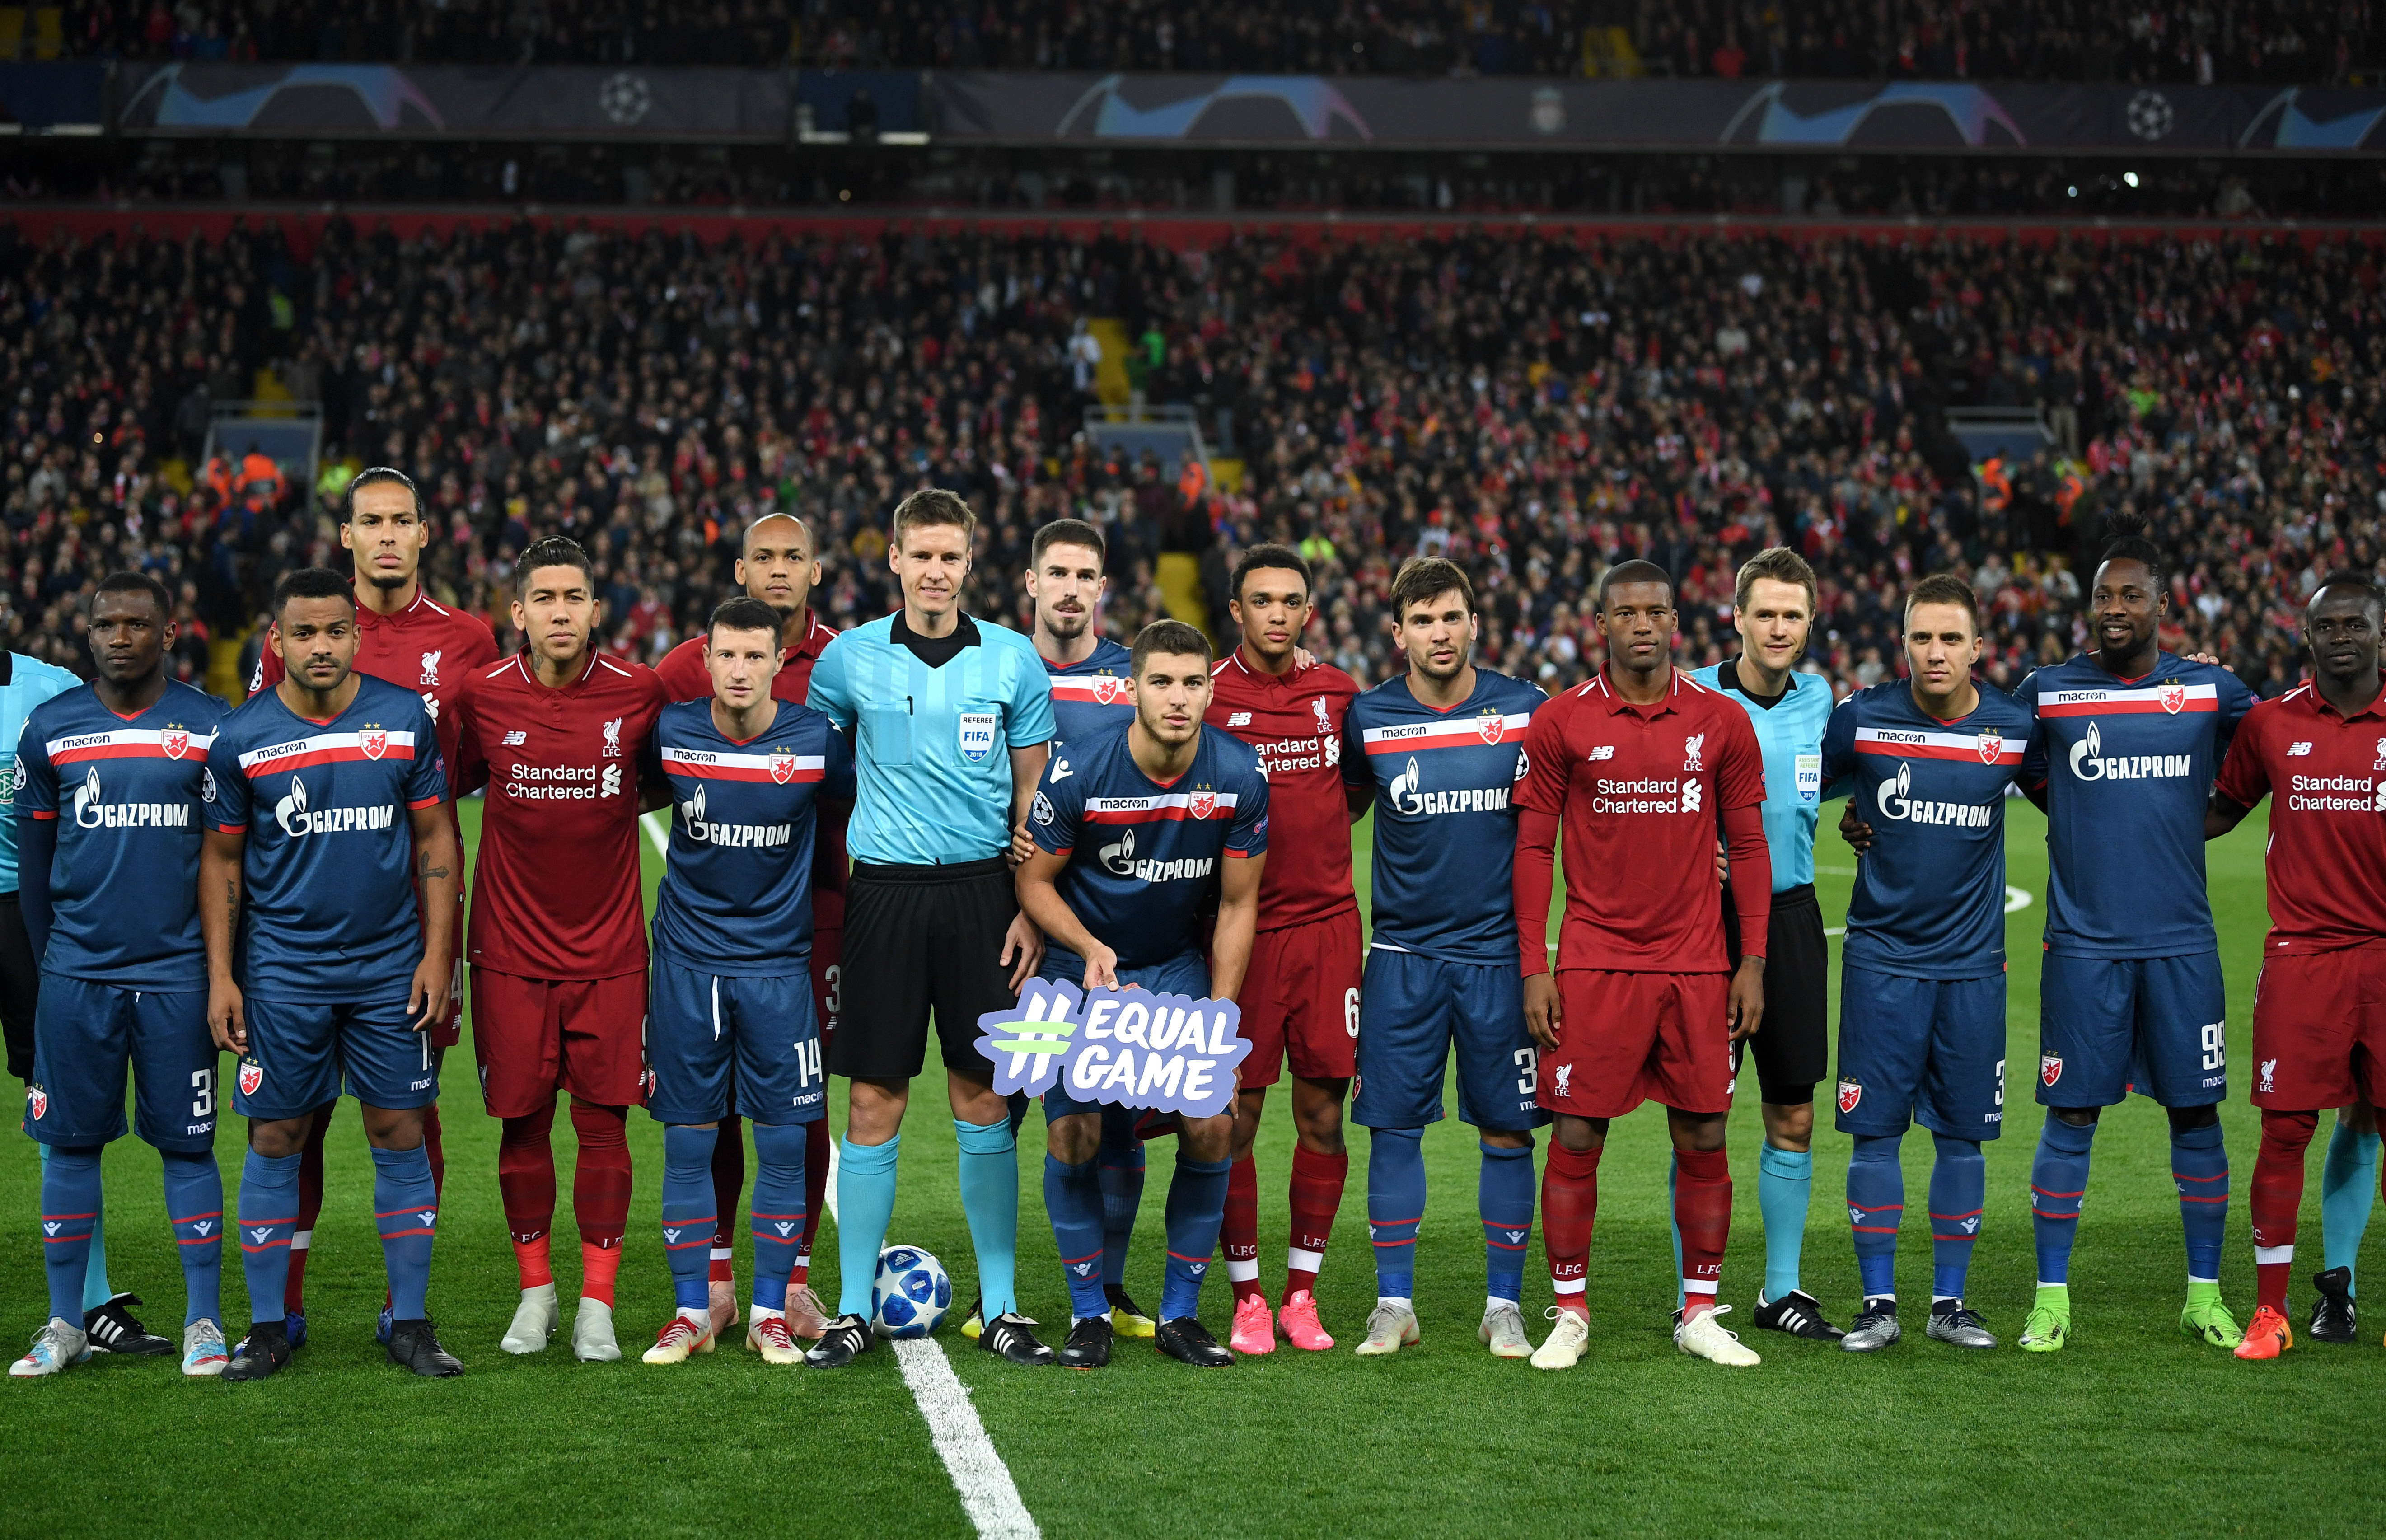 LIVERPOOL, ENGLAND - OCTOBER 24:  Liverpool and FK Crvena Zvezda players line up prior to the Group C match of the UEFA Champions League between Liverpool and FK Crvena Zvezda at Anfield on October 24, 2018 in Liverpool, United Kingdom.  (Photo by Michael Regan/Getty Images)